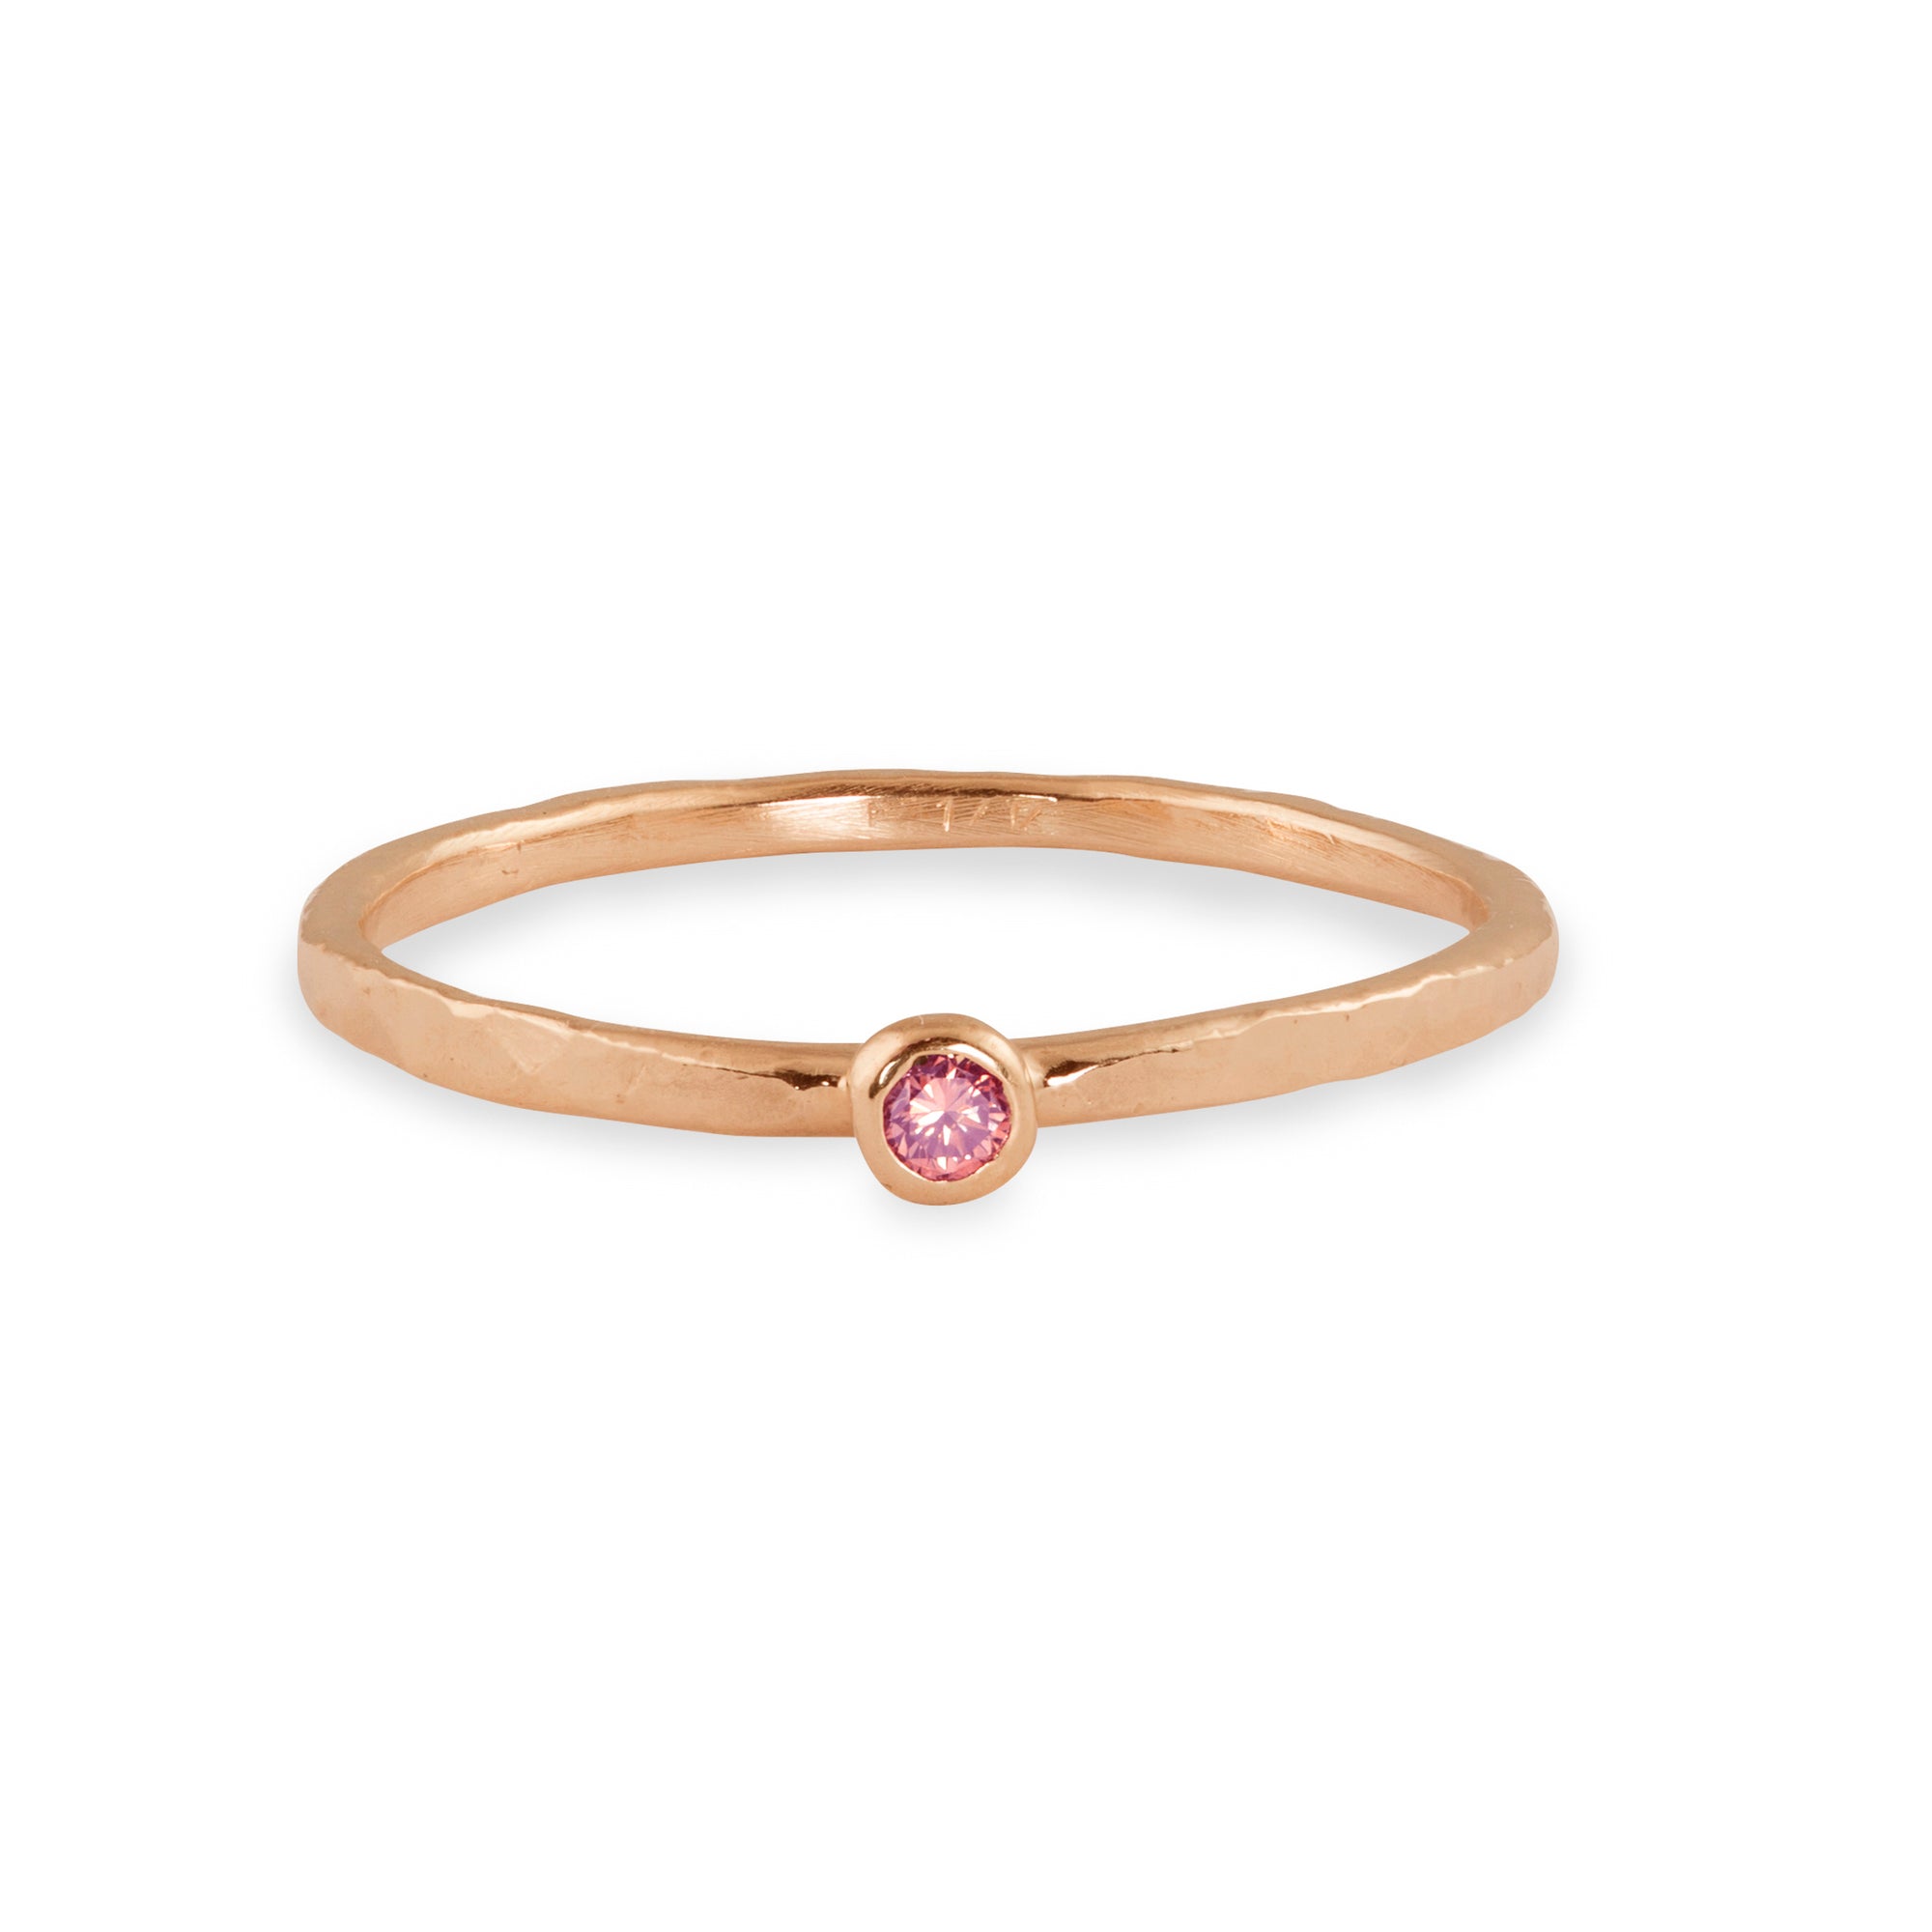 RELA Rose Gold Sapphire Stacker Ring - Size 6.75